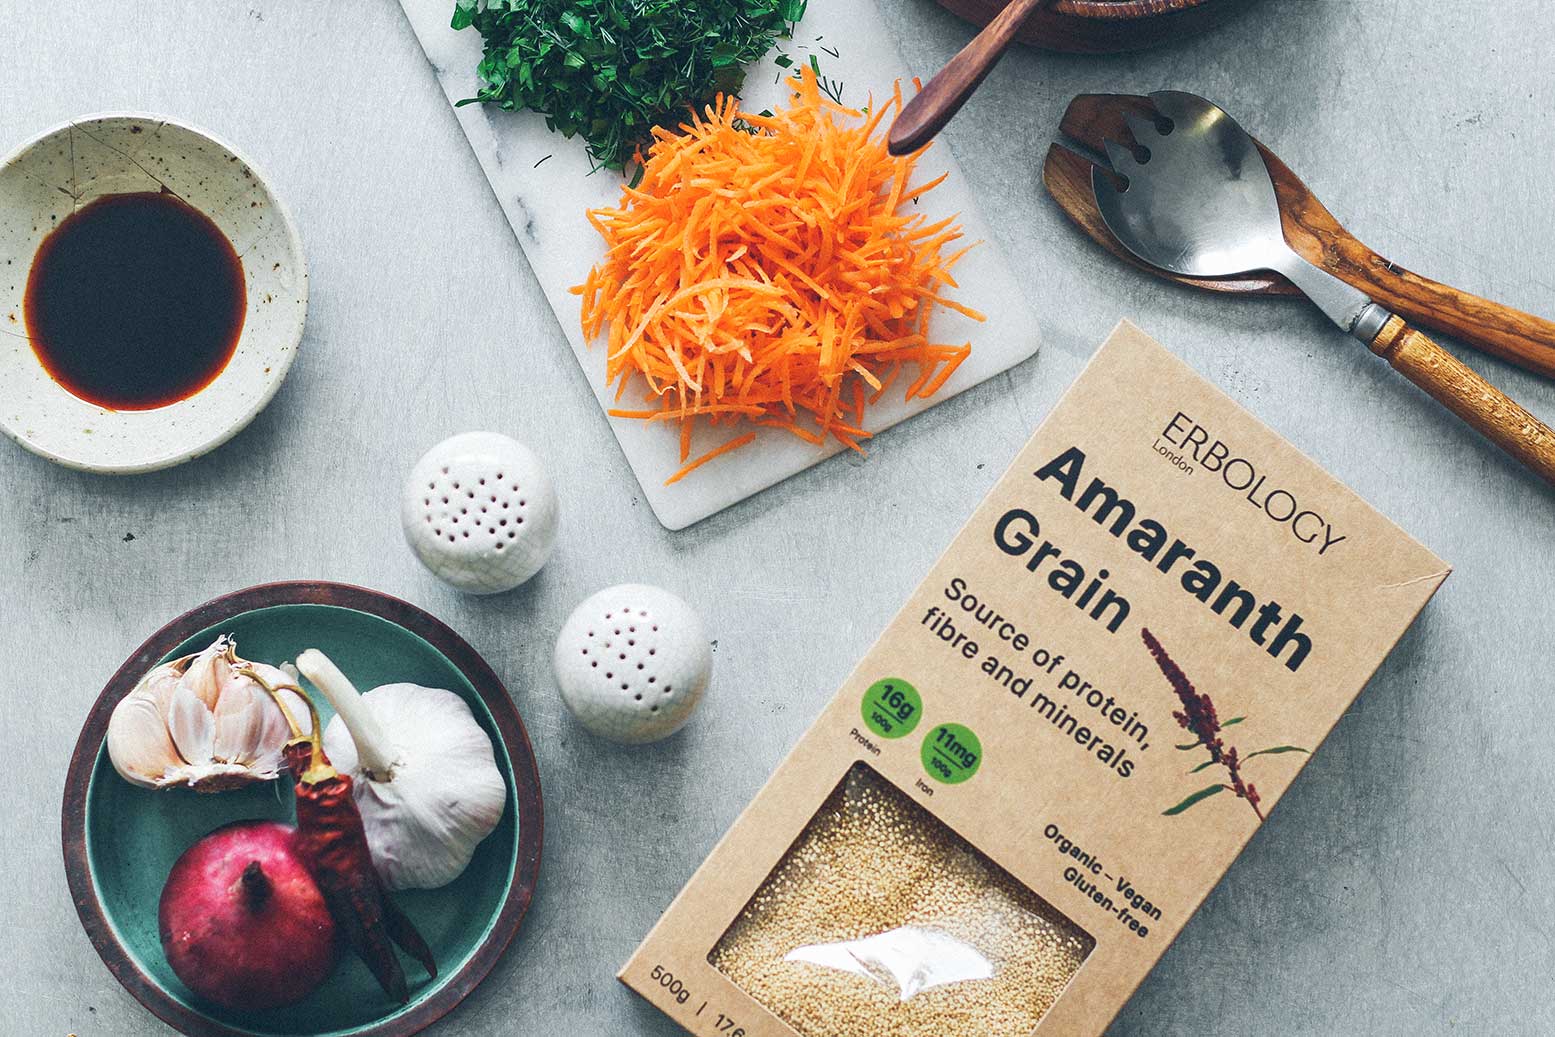 What is amaranth?